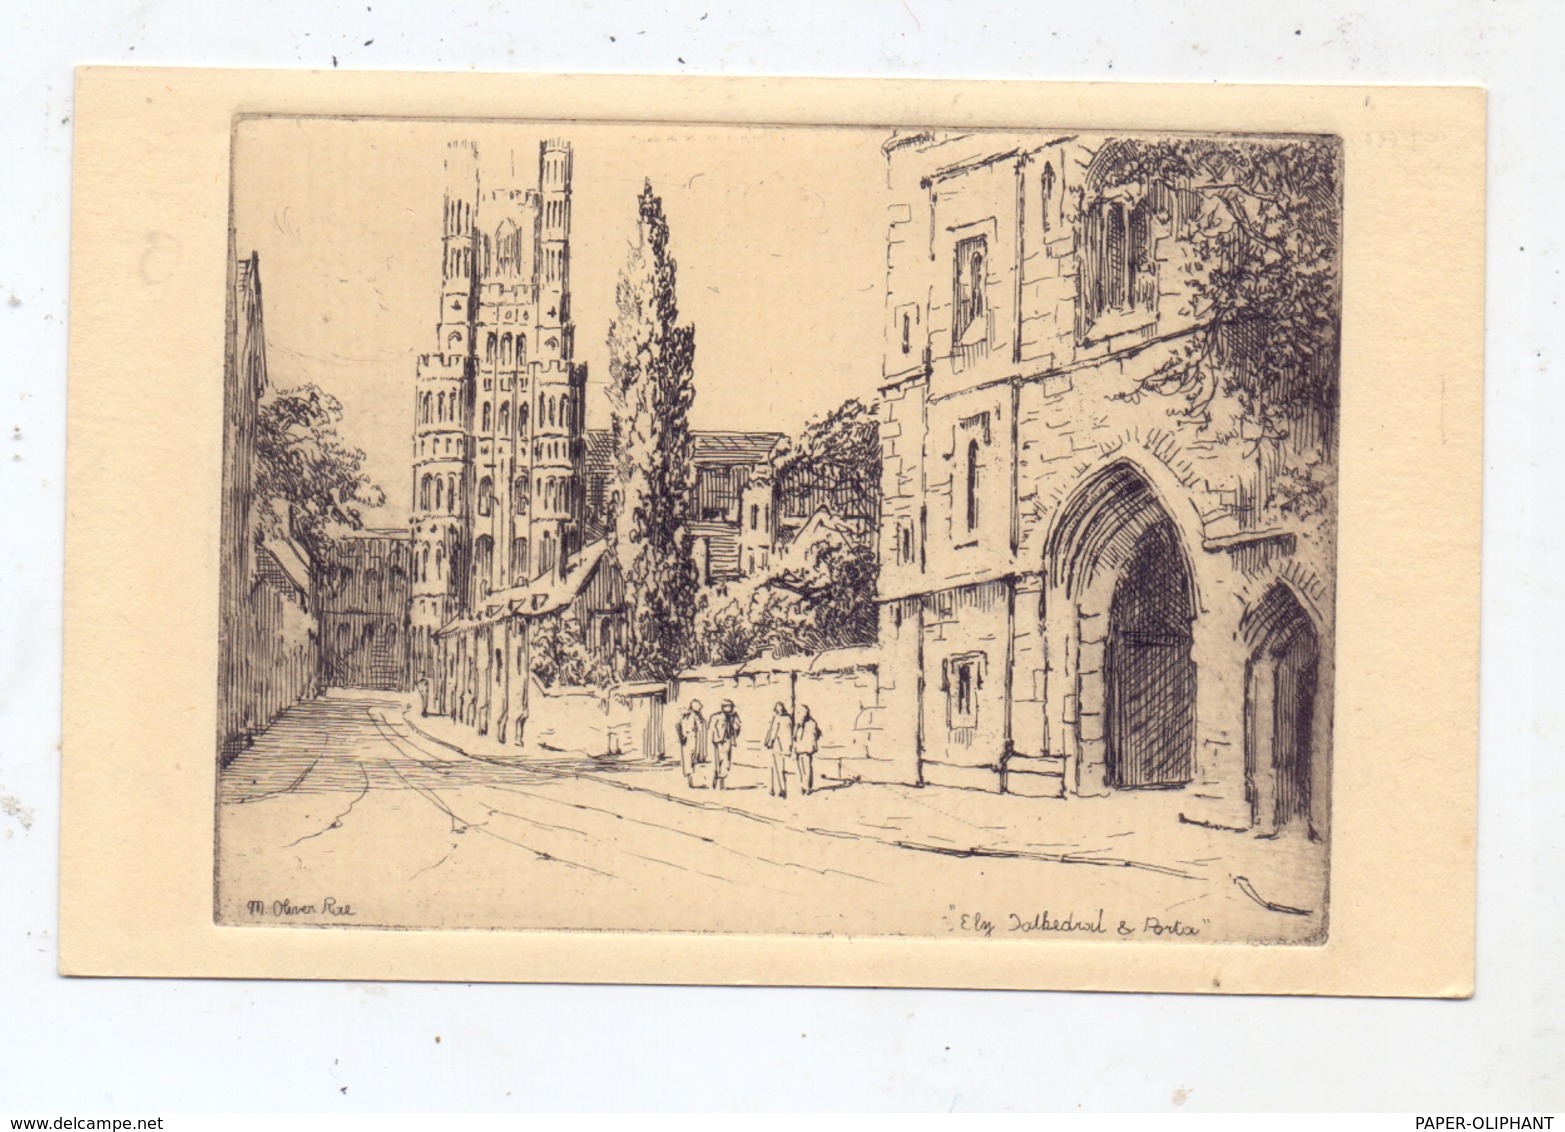 CAMBRIDGESHIRE - ELY, Ely Cathedral & Porta, Artist: Mabel Oliver Rae - Ely